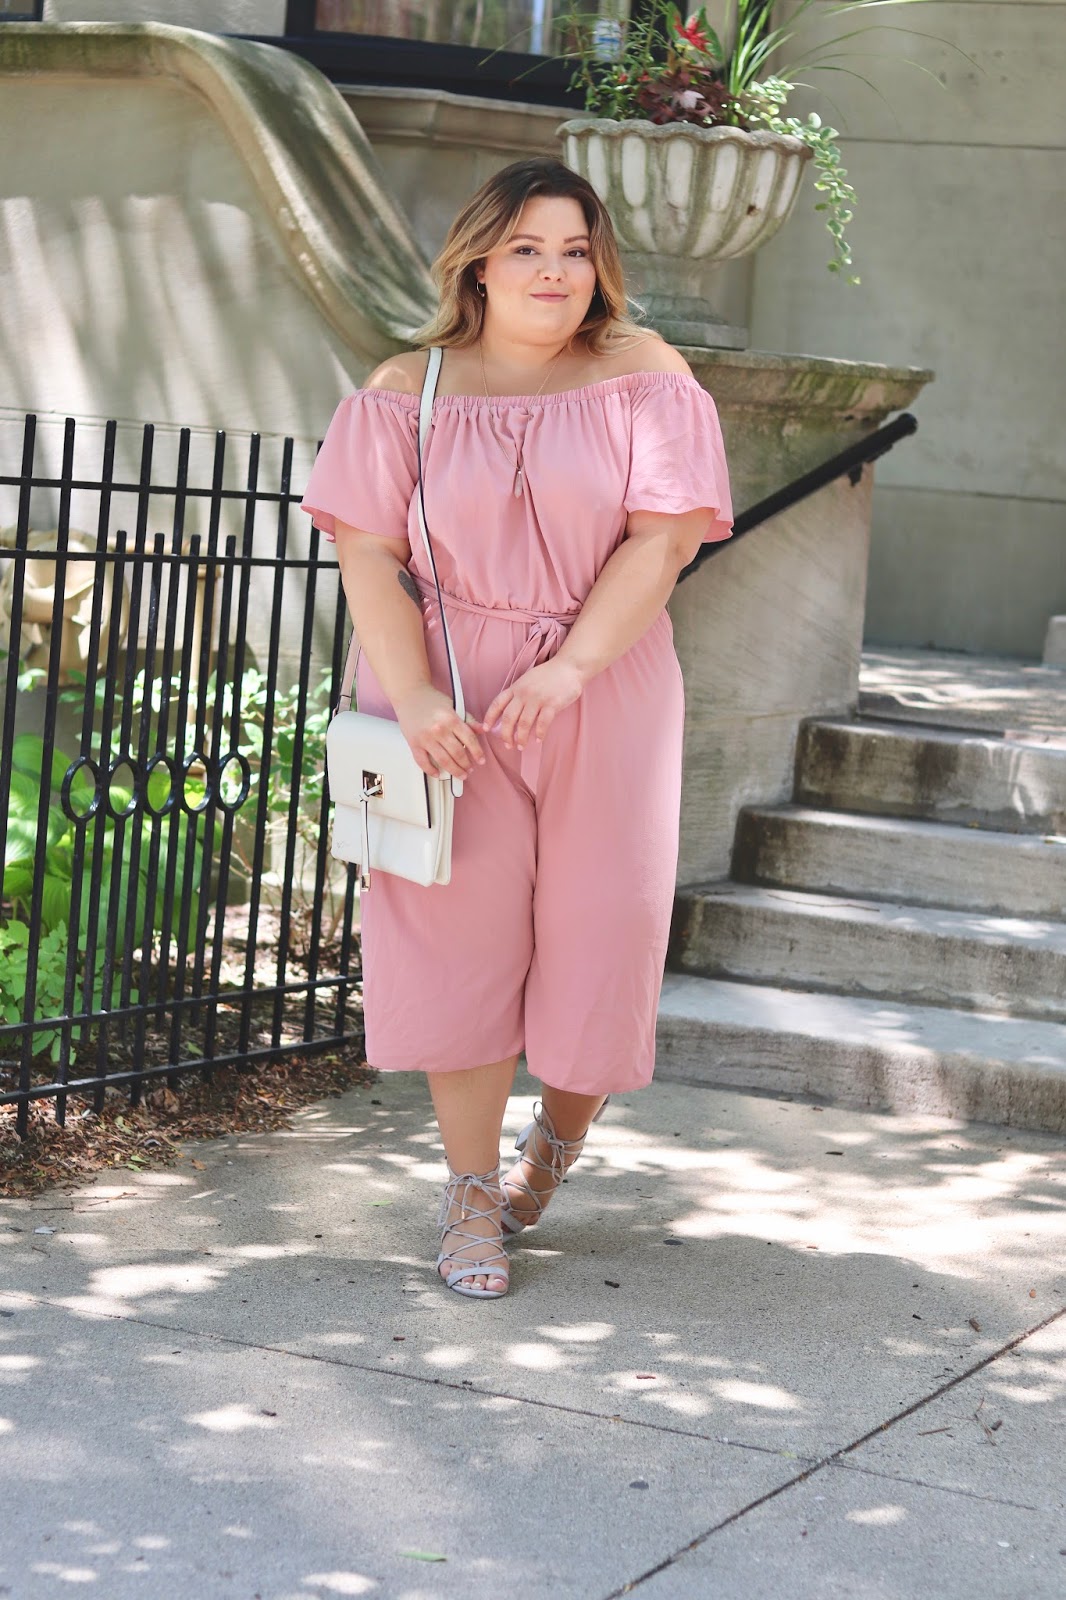 culotte jumpsuit, plus size jumpsuits, plus size rompers, affordable plus size fashion, back to school plus size fashion, natalie craig, natalie in the city, plus size fashion, plus size fashion blogger, Chicago fashion blogger, Chicago style, midwest blogger, yours clothing, plus size outfit, romantic outfit, curves and confidence, fatshion